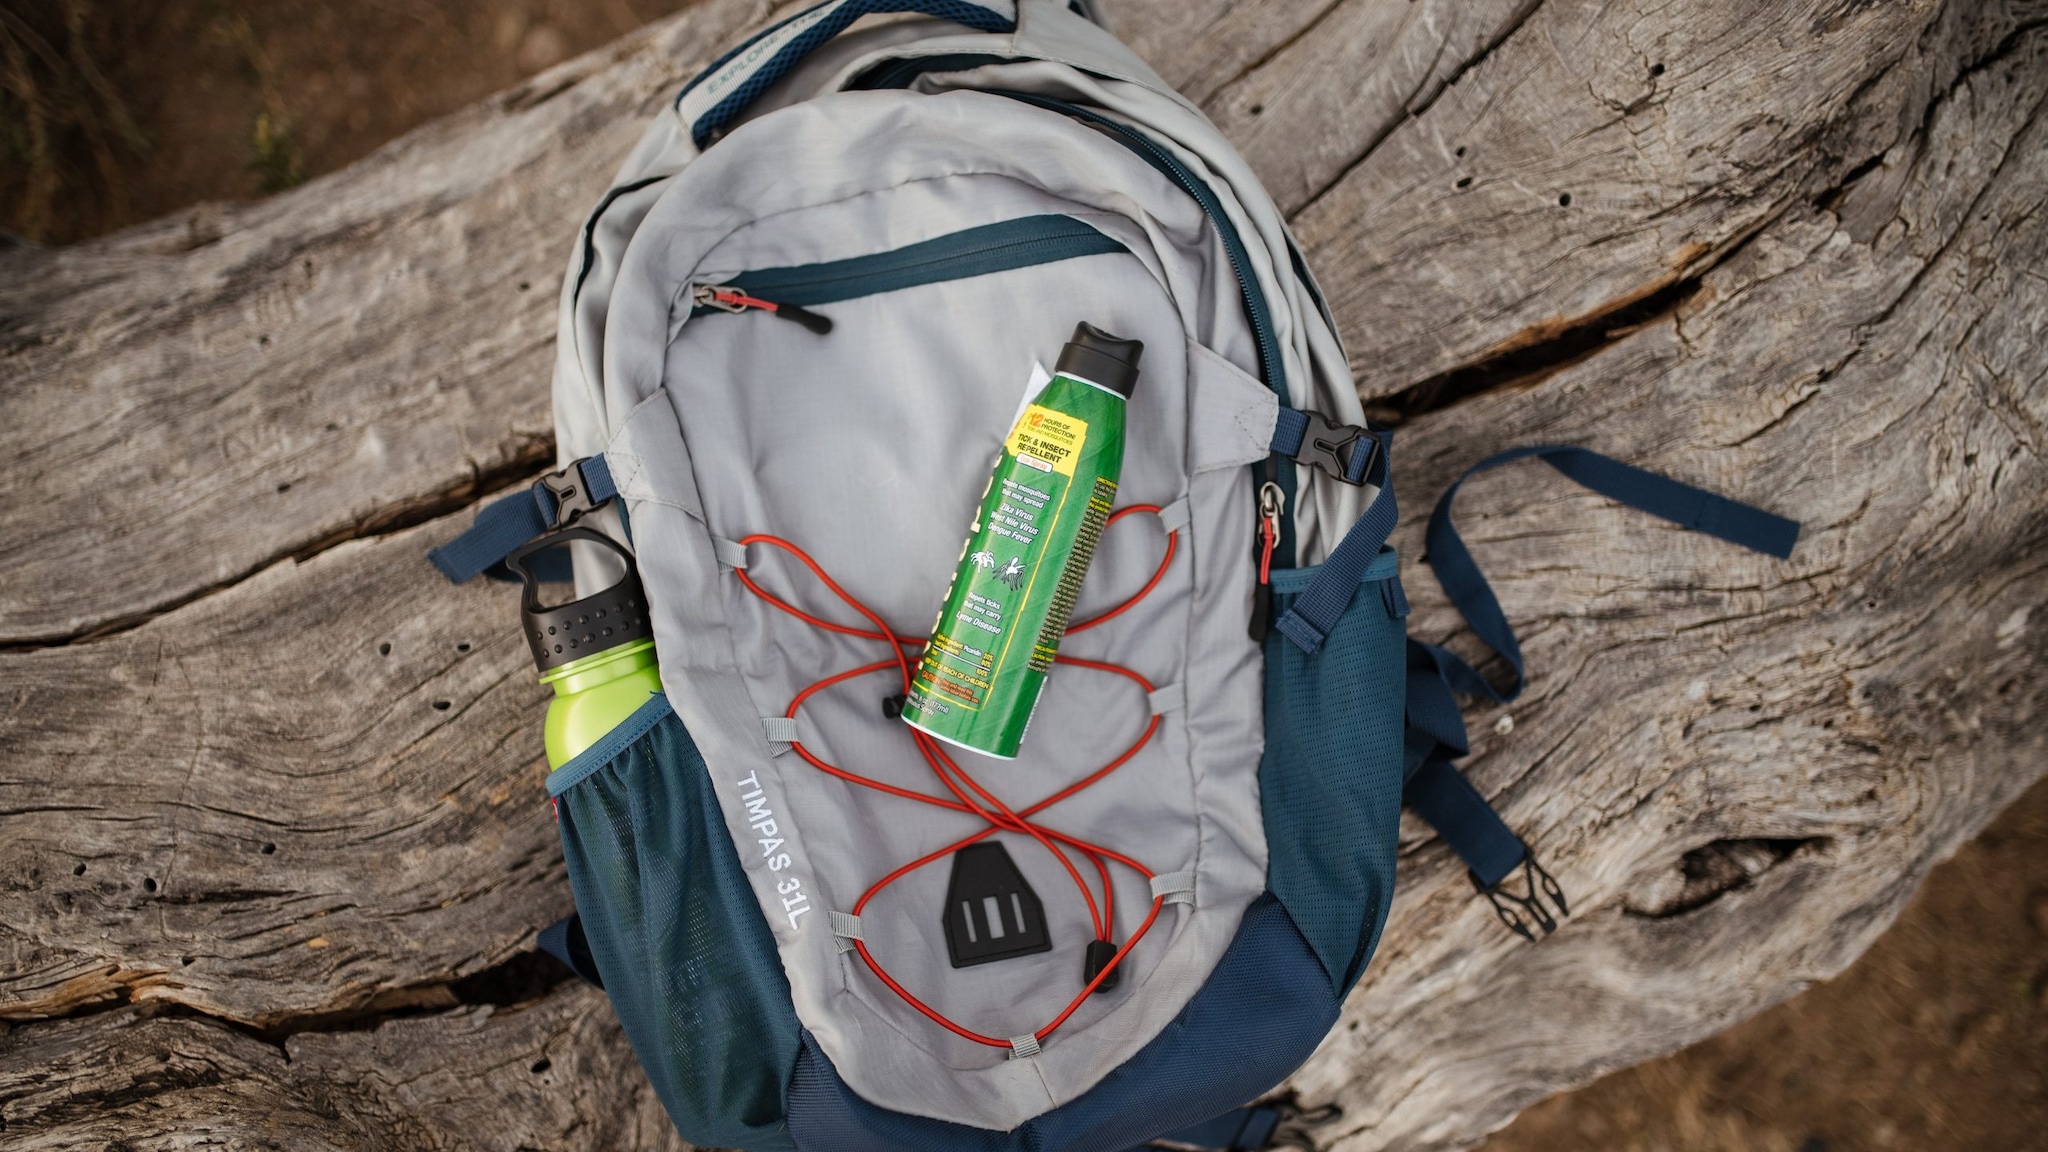 Can of insect repellent on top of a backpack.